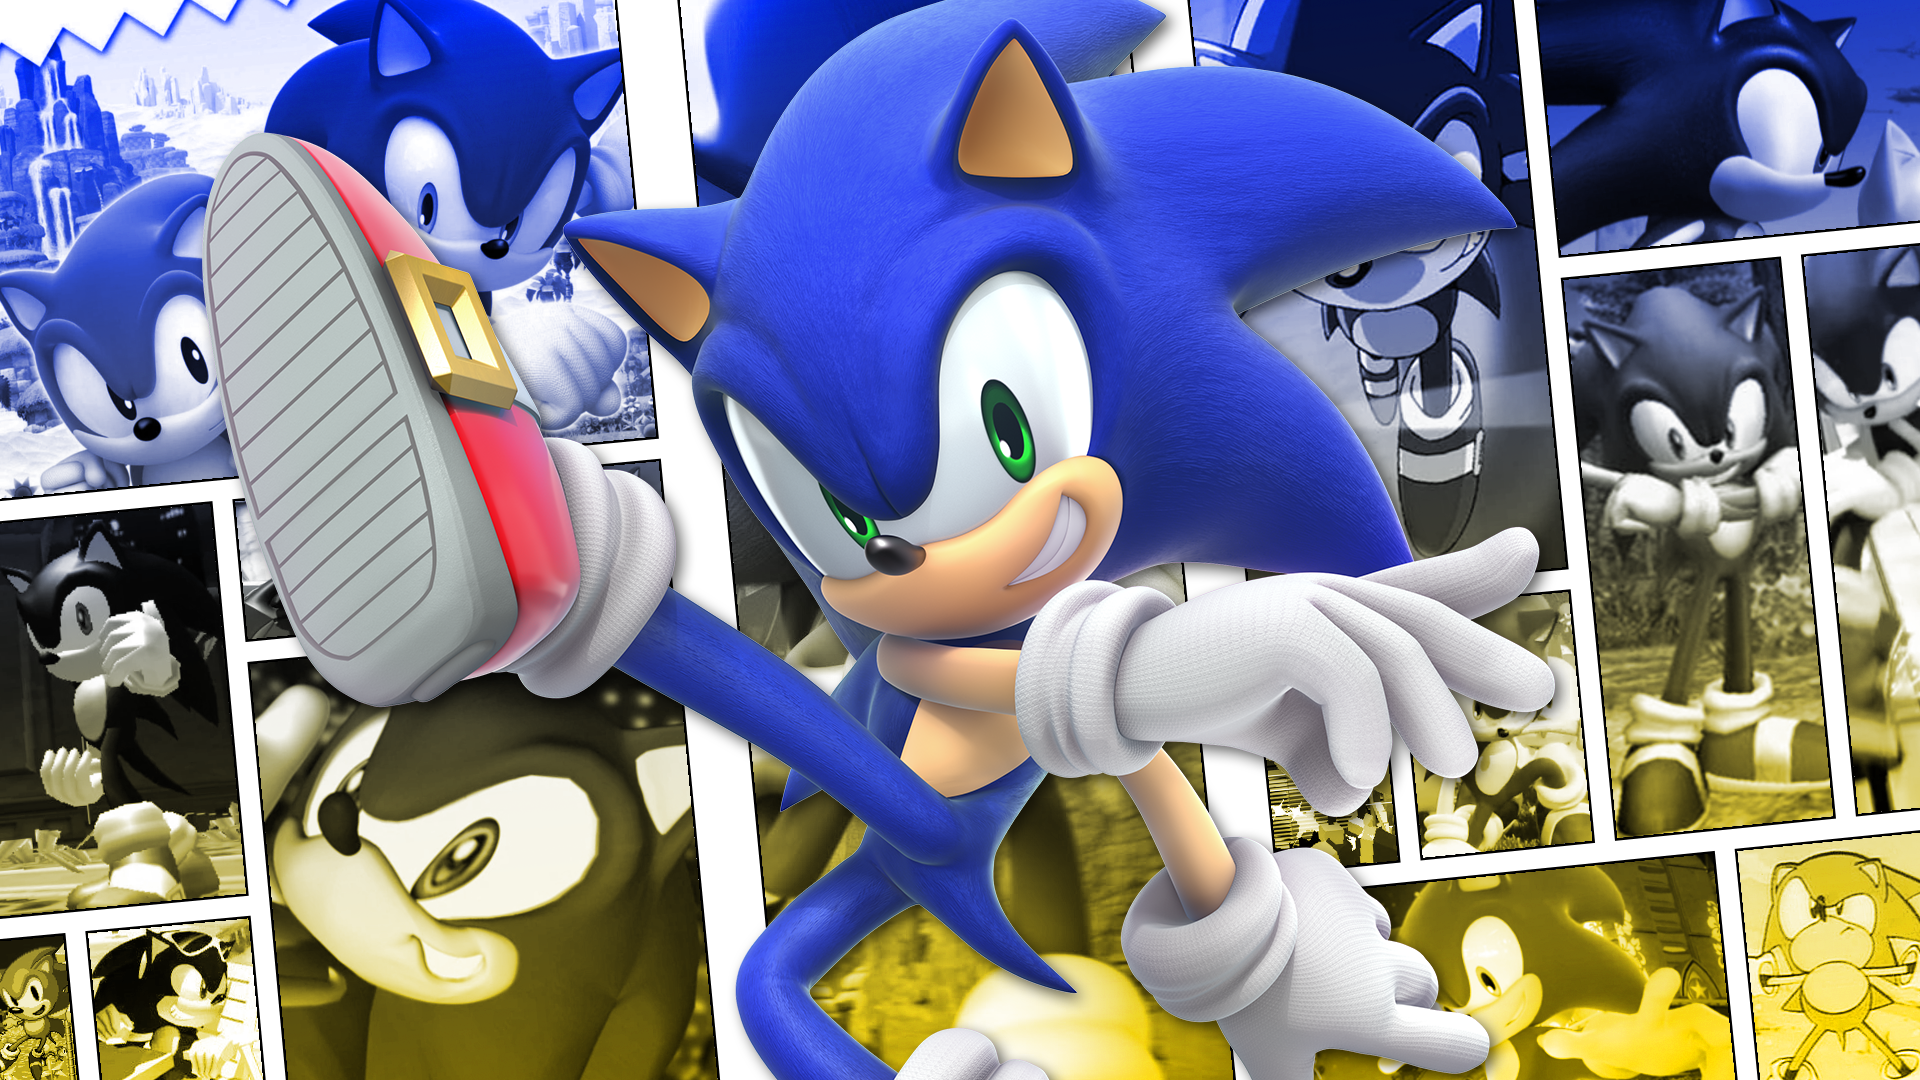 Classic Sonic Fanart by Dude1009 on Newgrounds